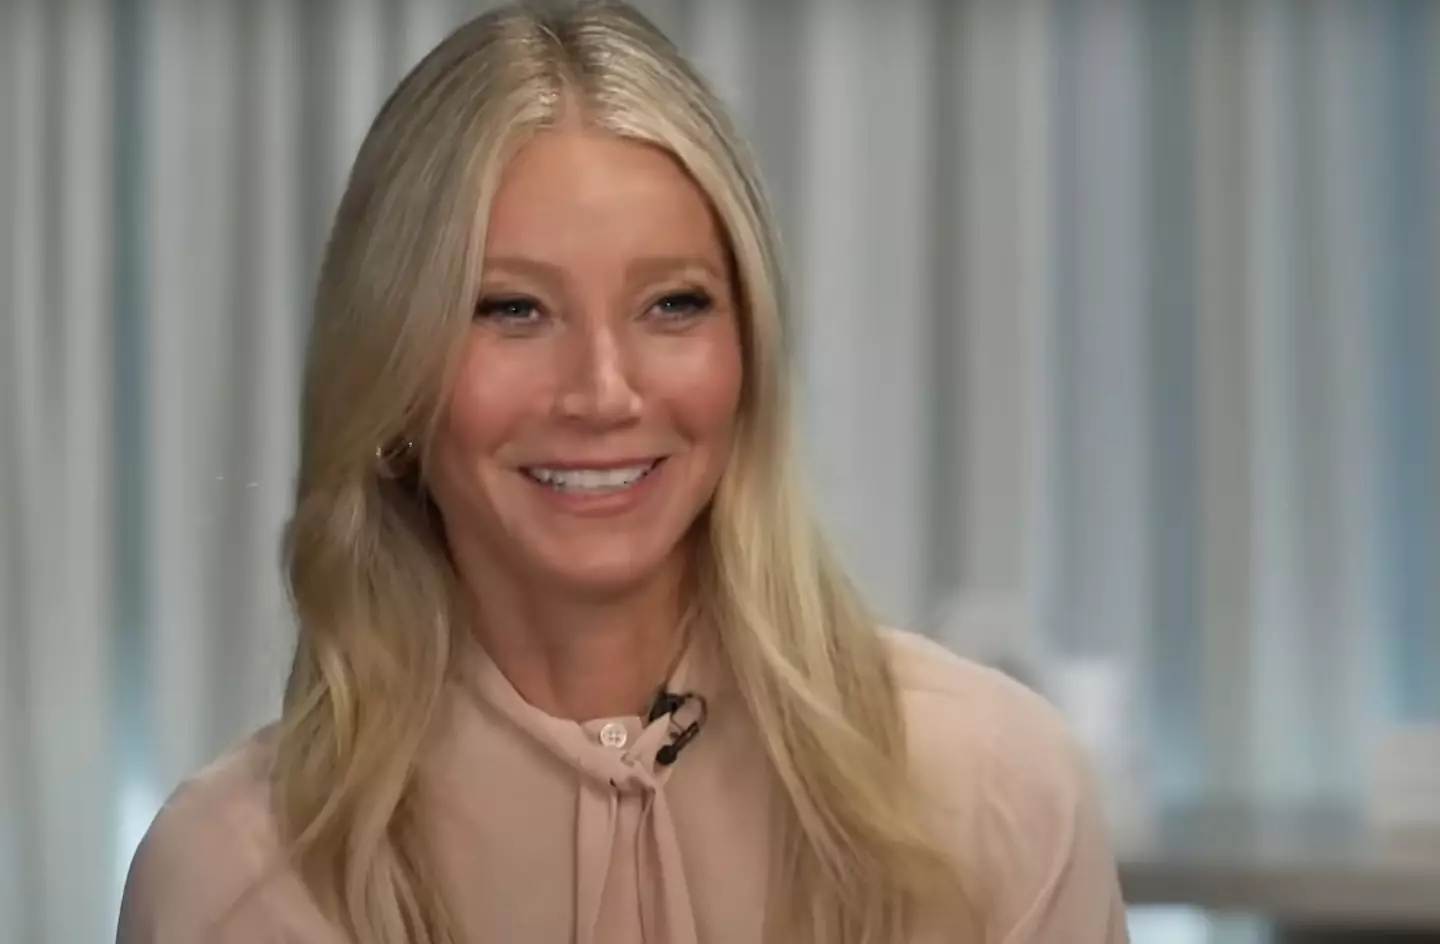 Gwyneth Paltrow had previously drawn criticism for her approach to eating.